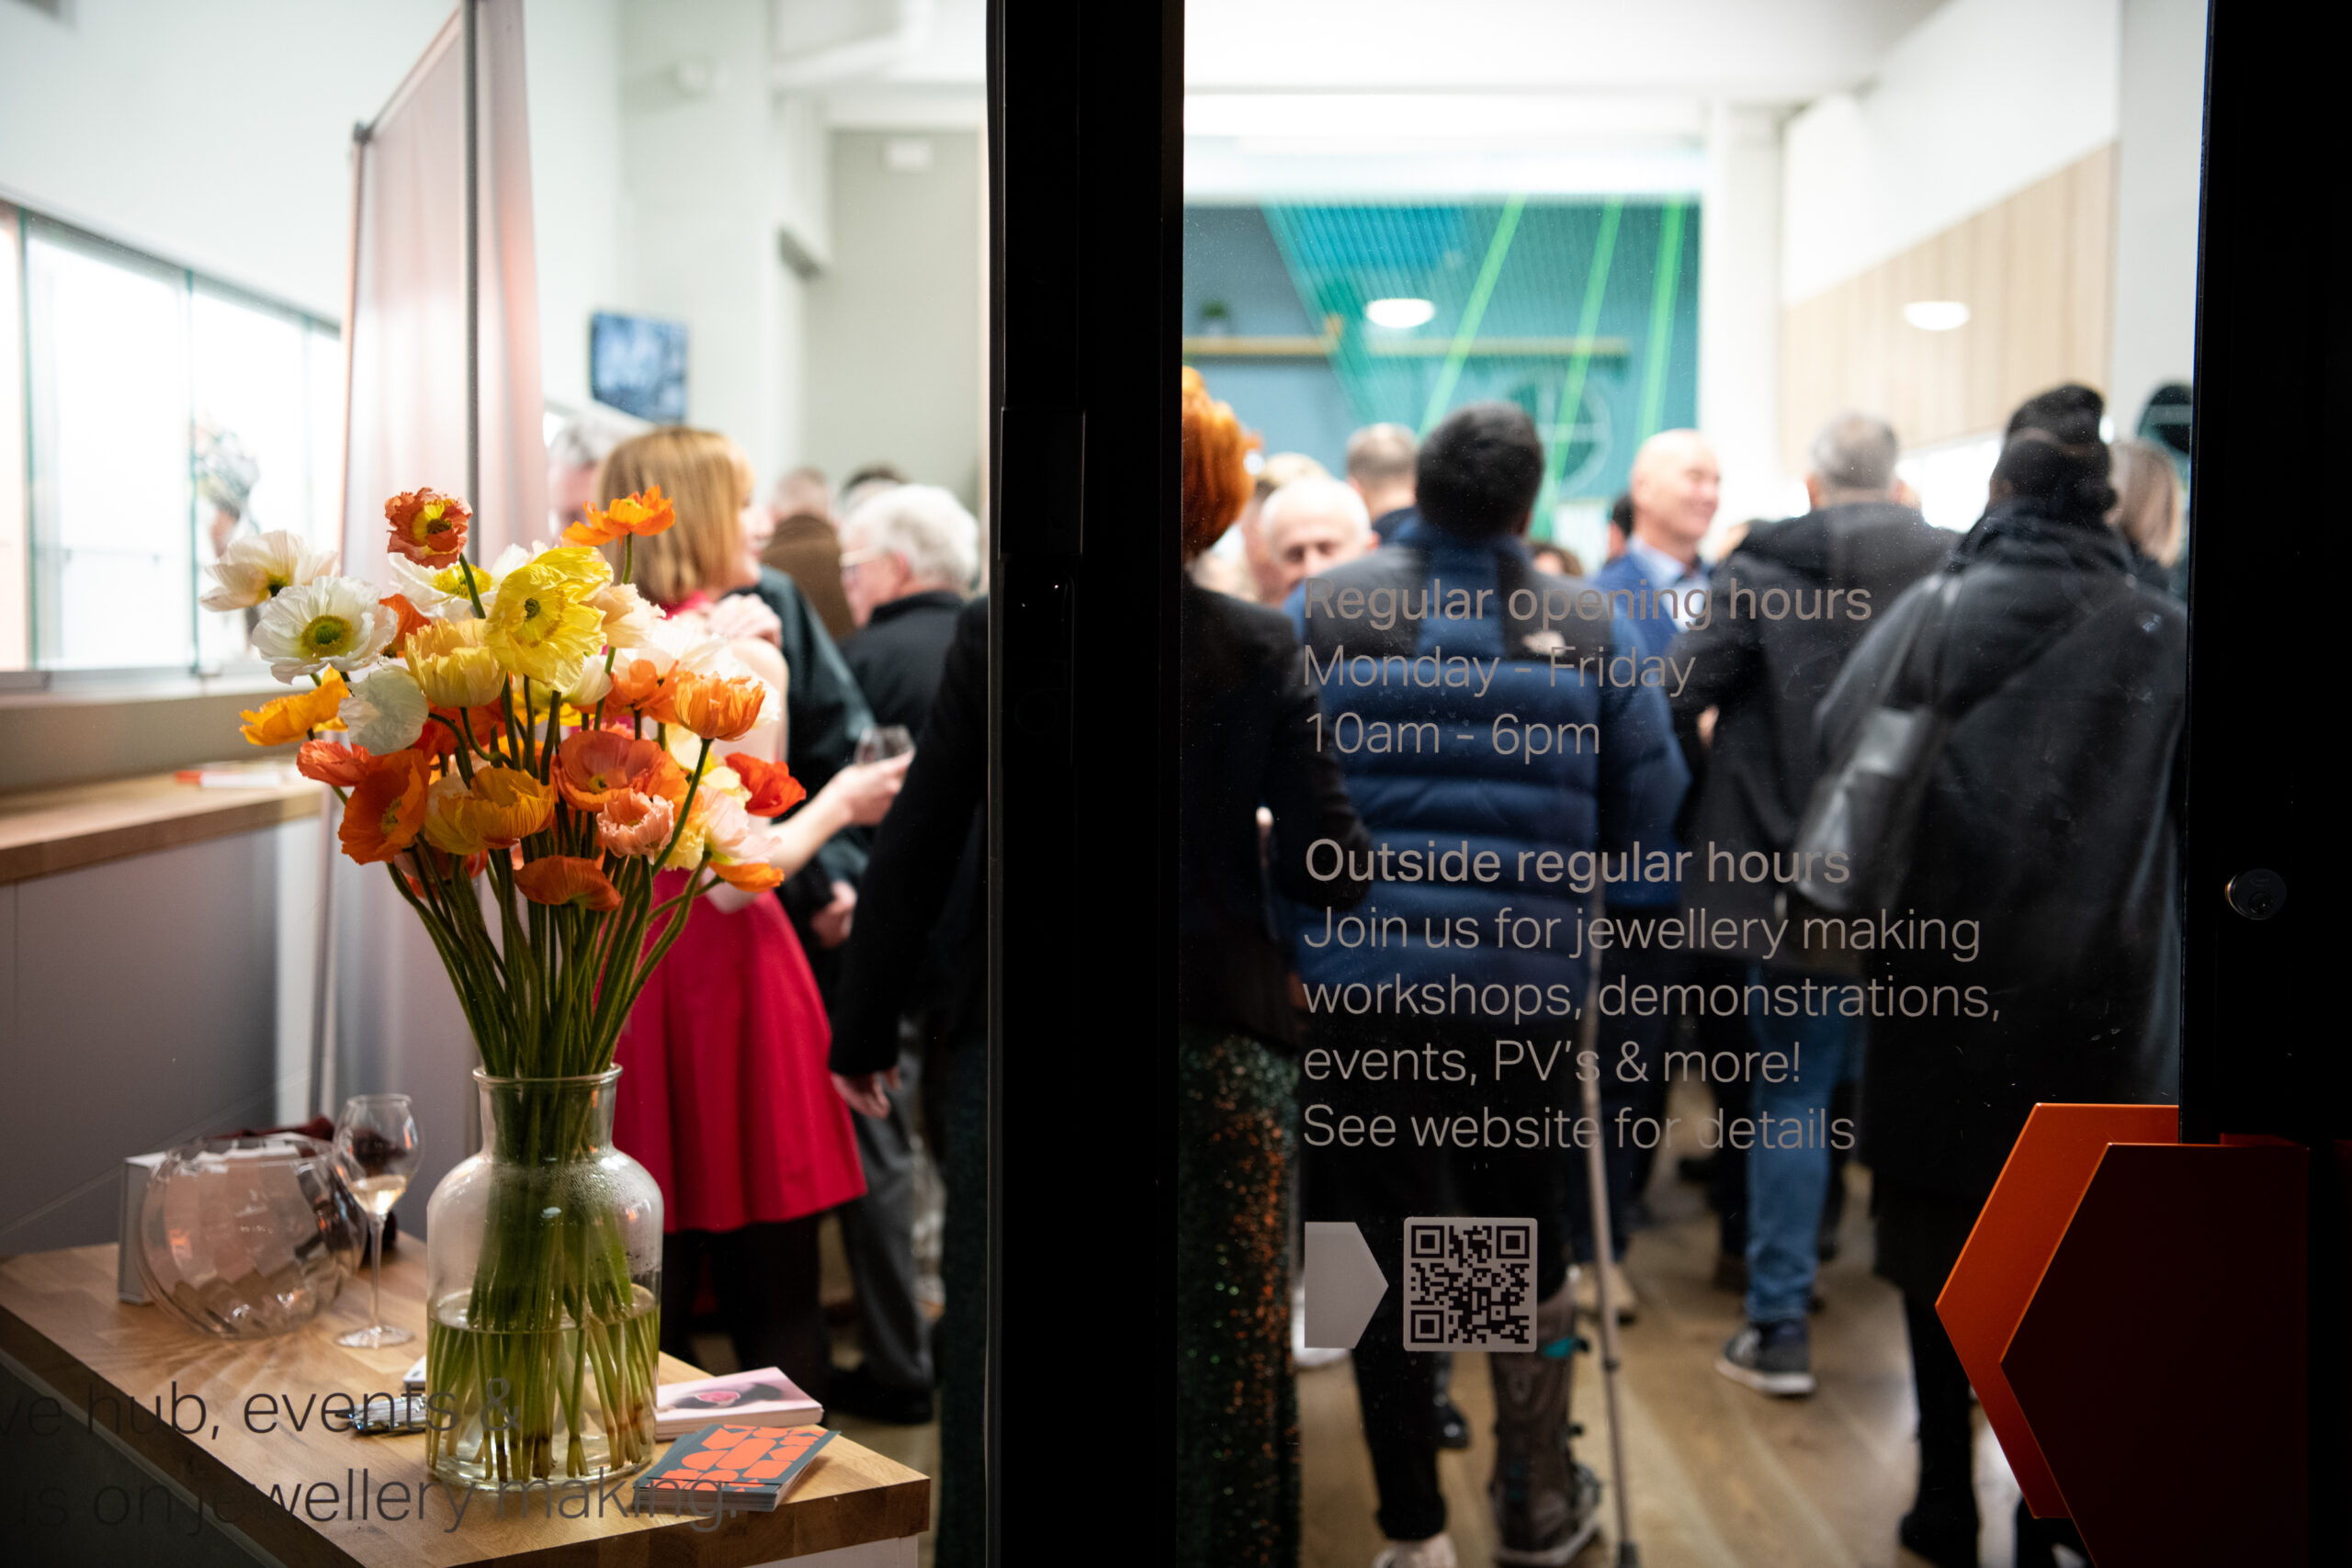 people gathered in jewellery exhbition space, seen through glass window, with a vase of flowers